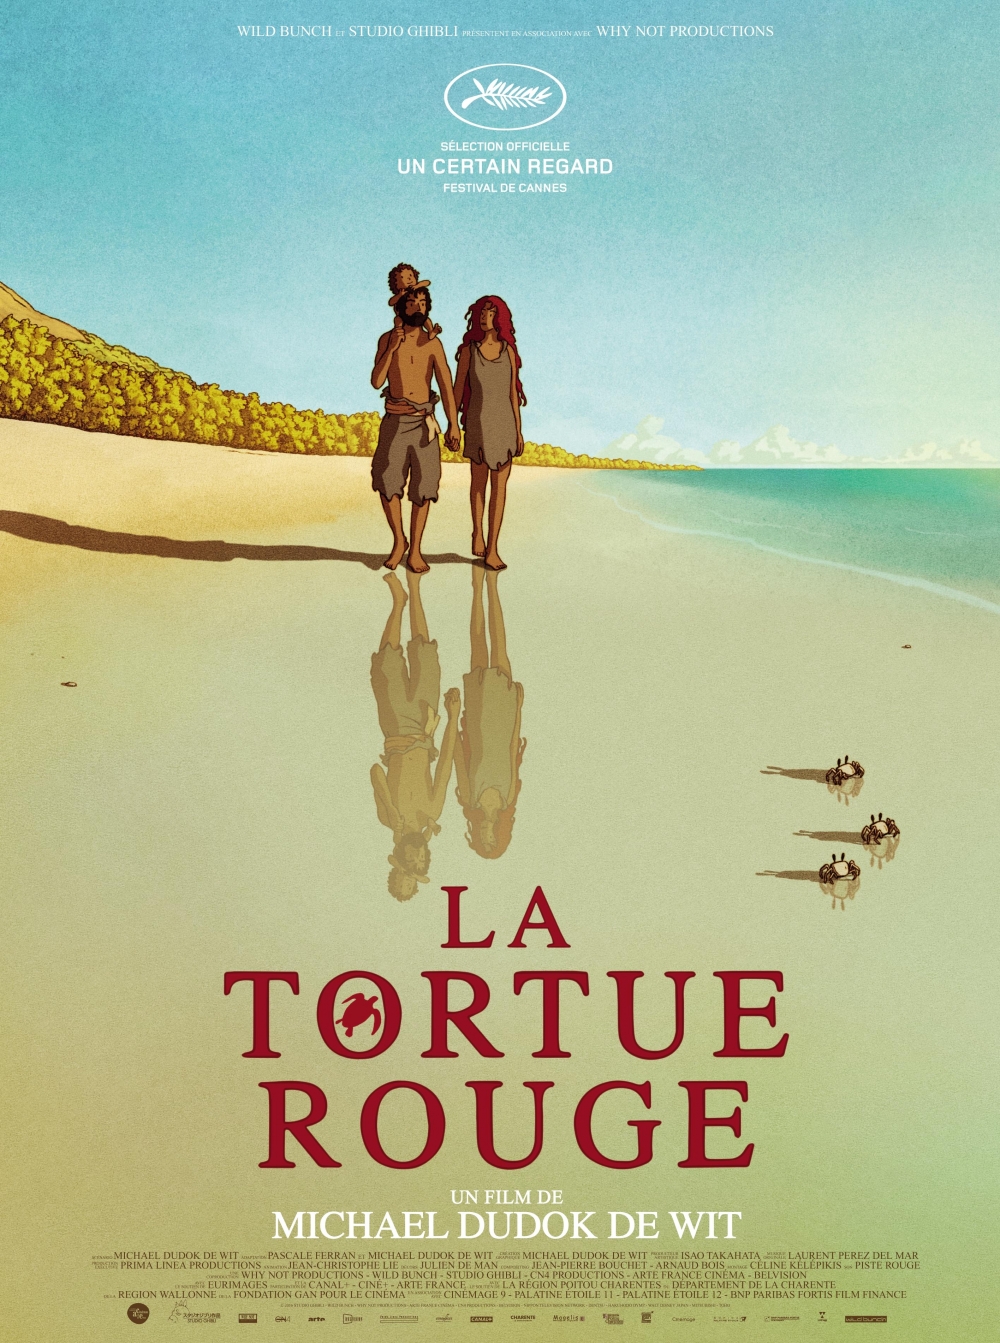 The Red Turtle - Wikipedia